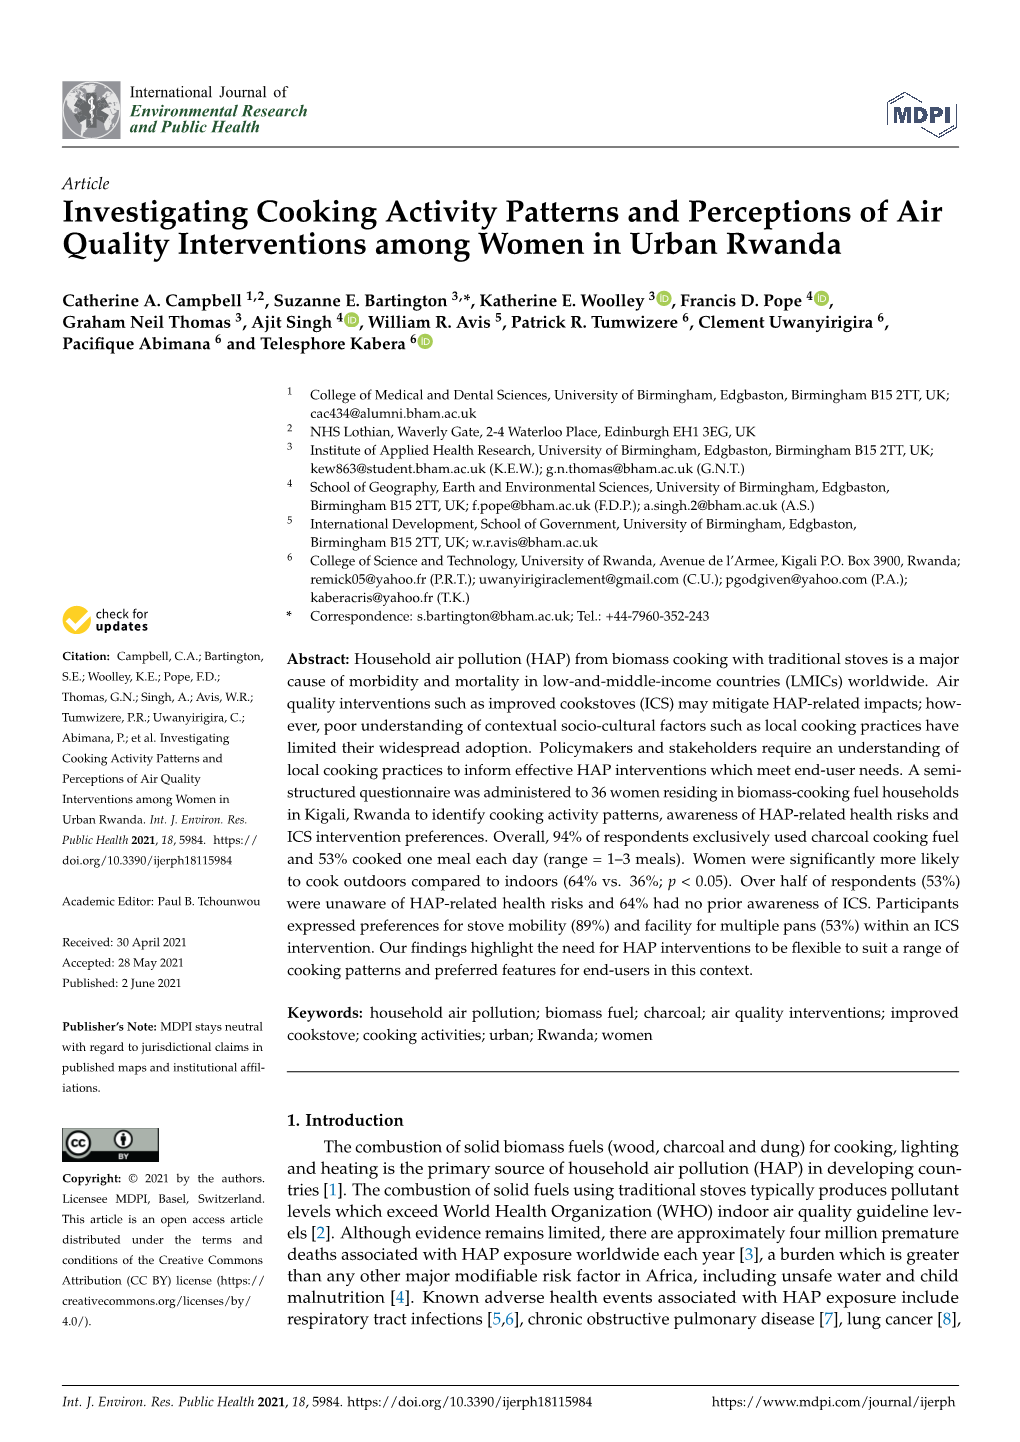 Investigating Cooking Activity Patterns and Perceptions of Air Quality Interventions Among Women in Urban Rwanda